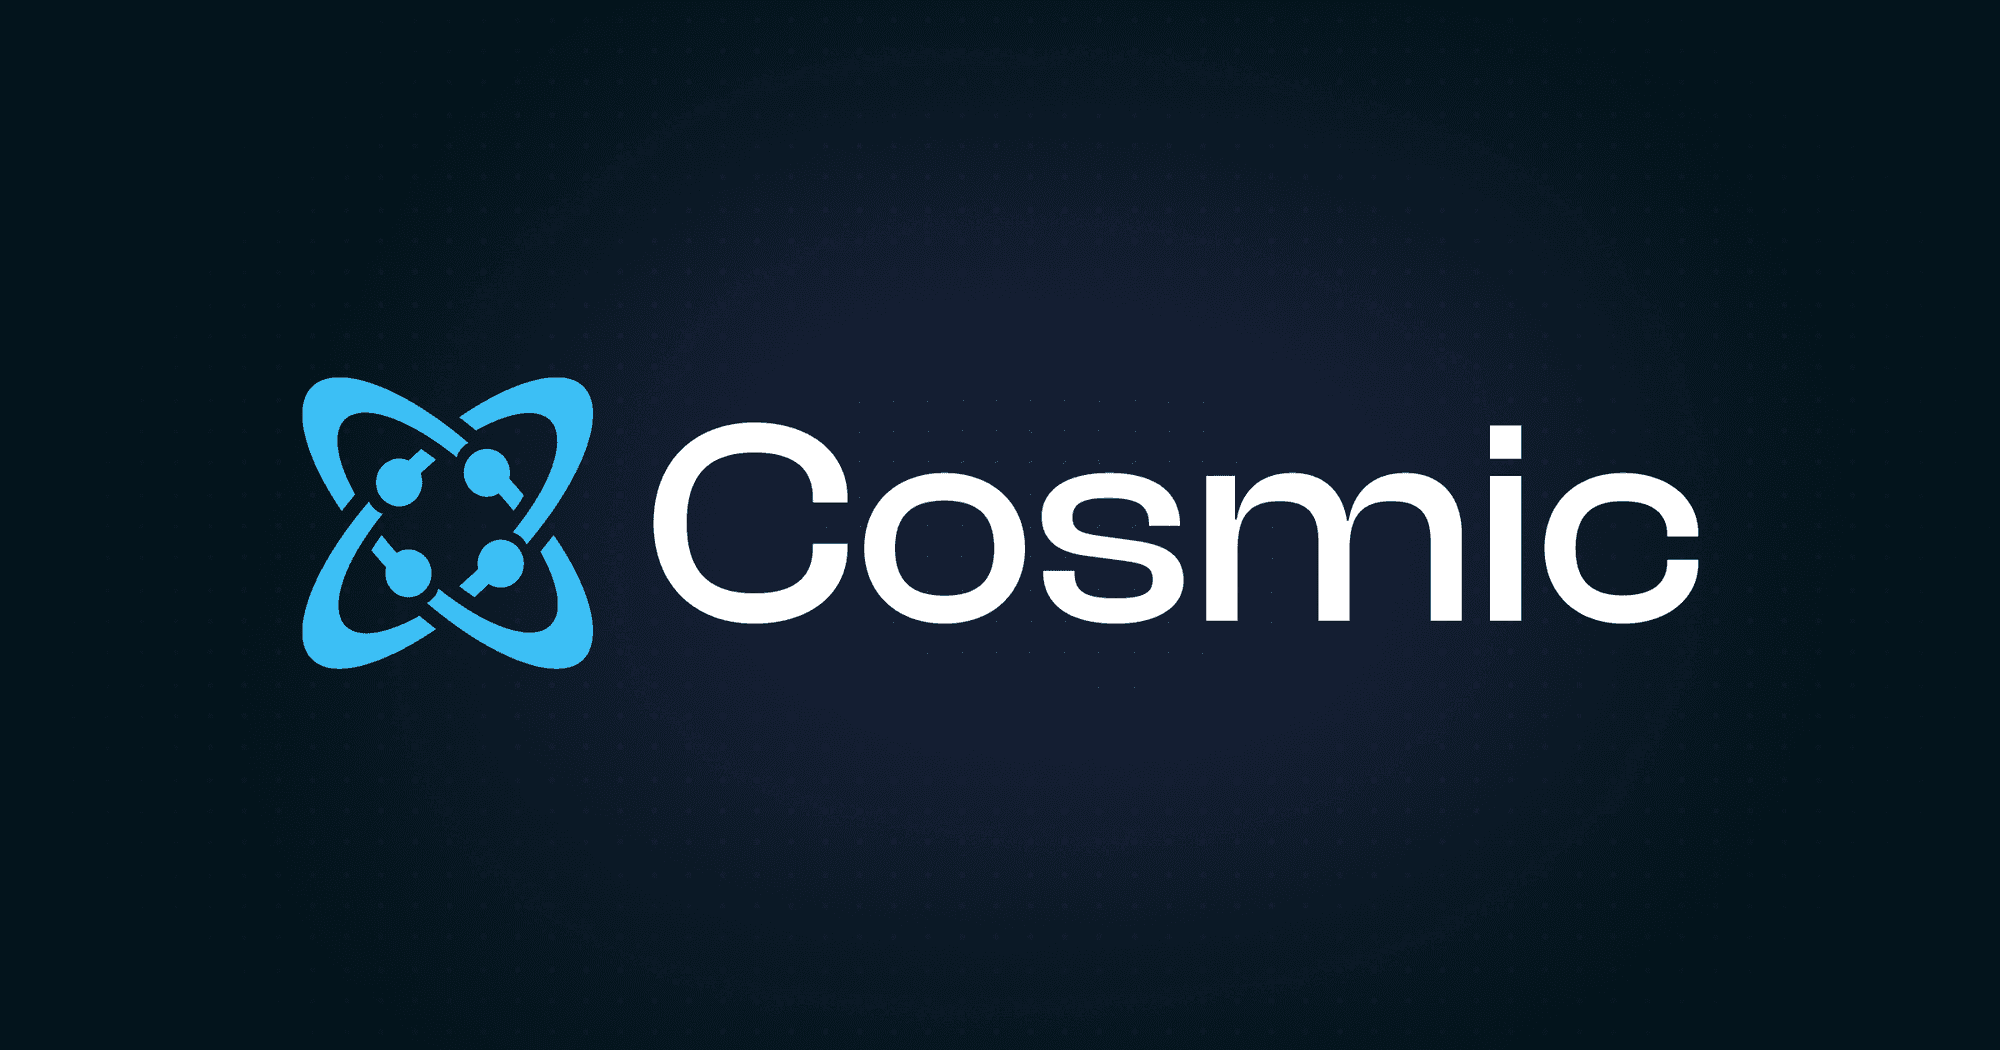 Product Headless CMS for Multimedia Management | Cosmic image